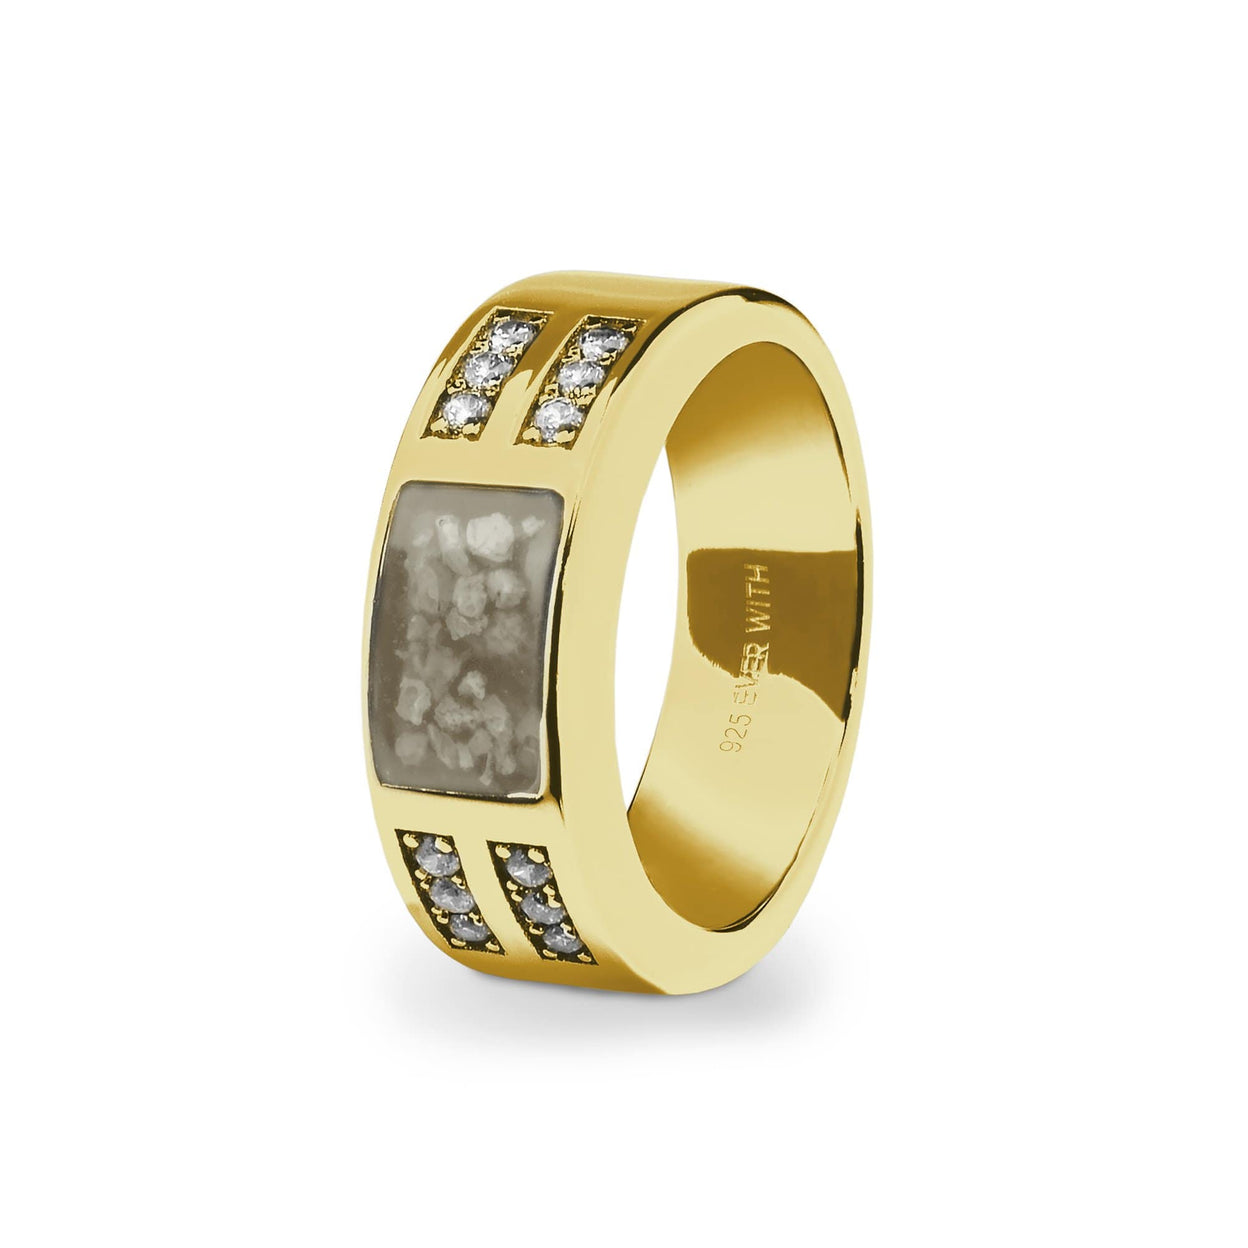 Load image into Gallery viewer, EverWith Gents Oblong Memorial Ashes Ring with Fine Crystals - EverWith Memorial Jewellery - Trade